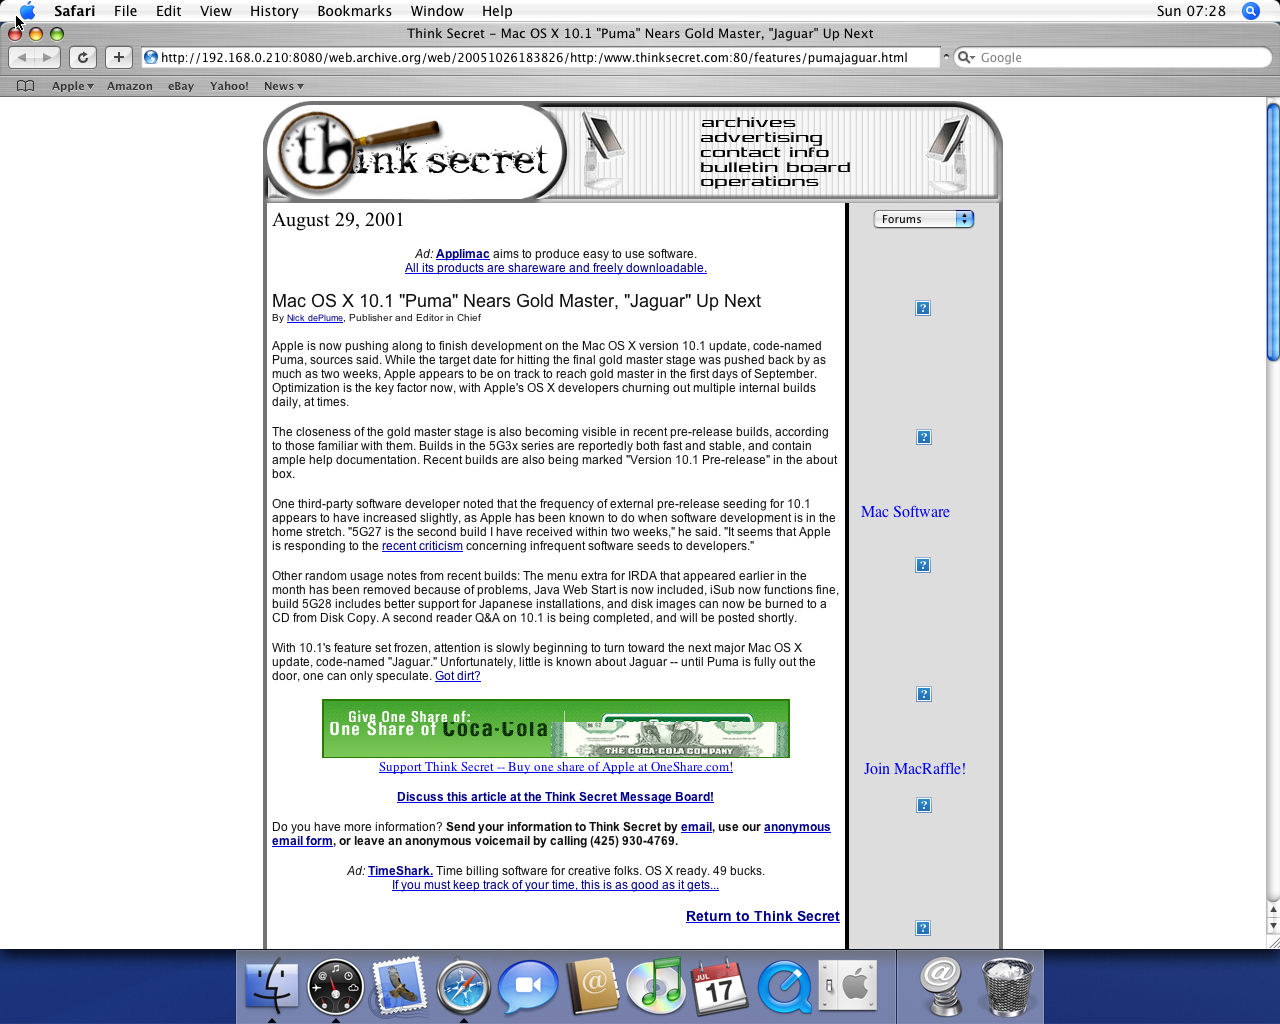 OS X 10.4 PPC with Safari 2.0 displaying a page from Think Secret archived at October 26, 2005 at 18:38:26